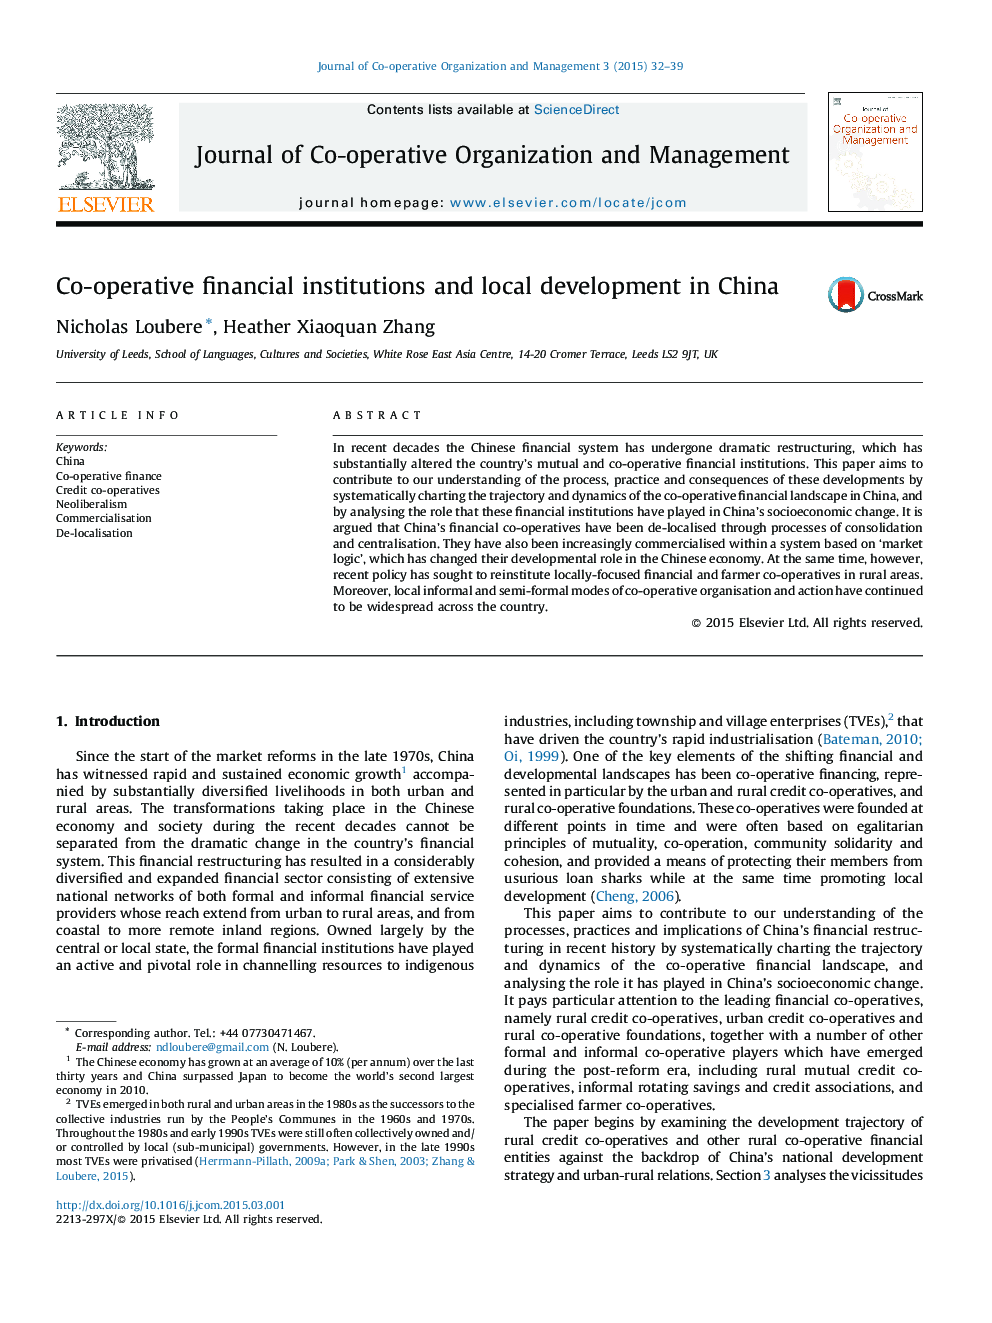 Co-operative financial institutions and local development in China